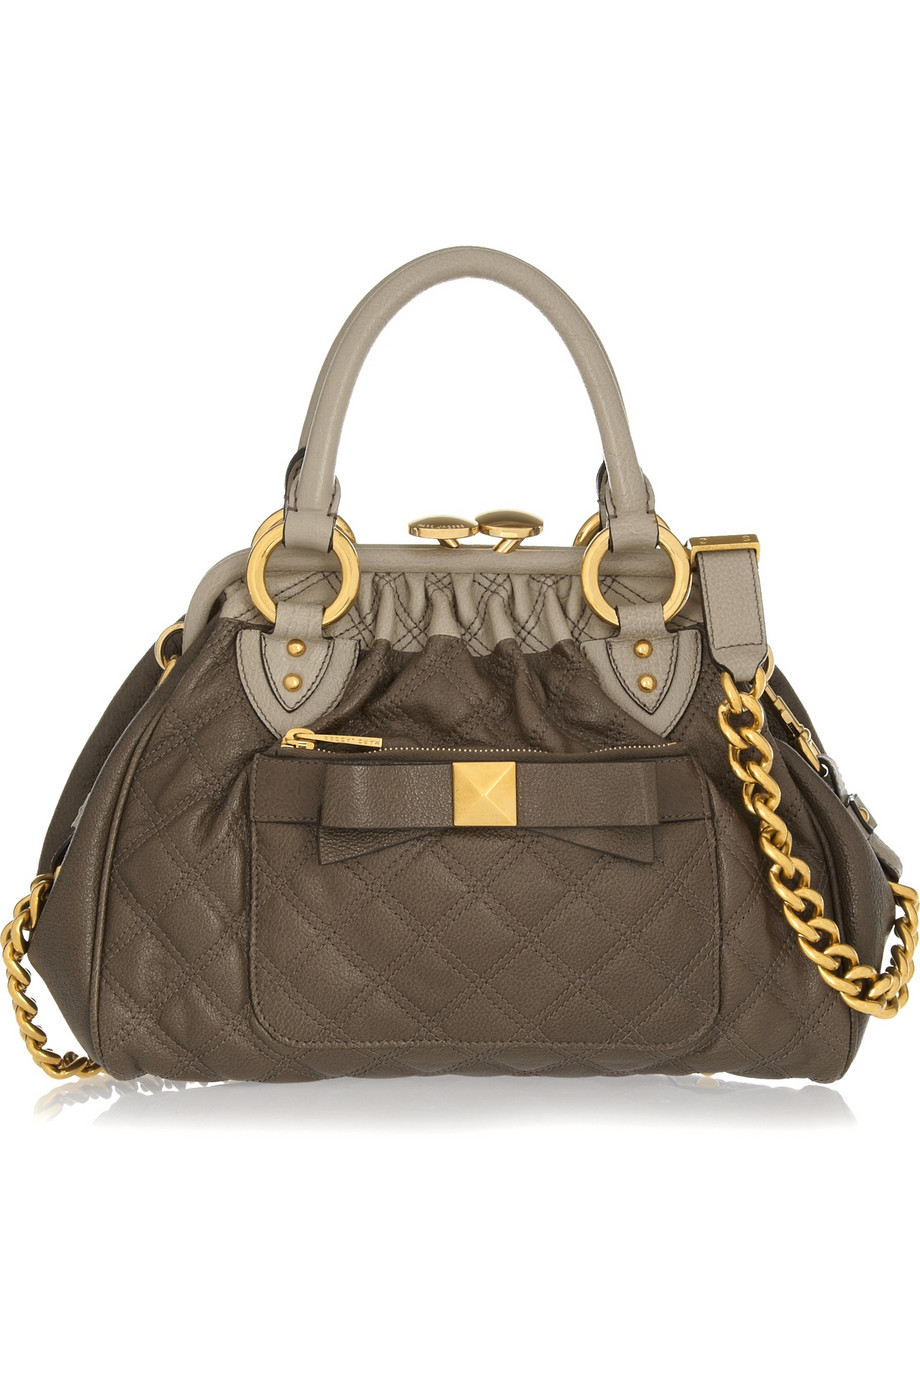 Marc Jacobs Mini Stam Quilted Leather Shoulder Bag in Gray | Lyst